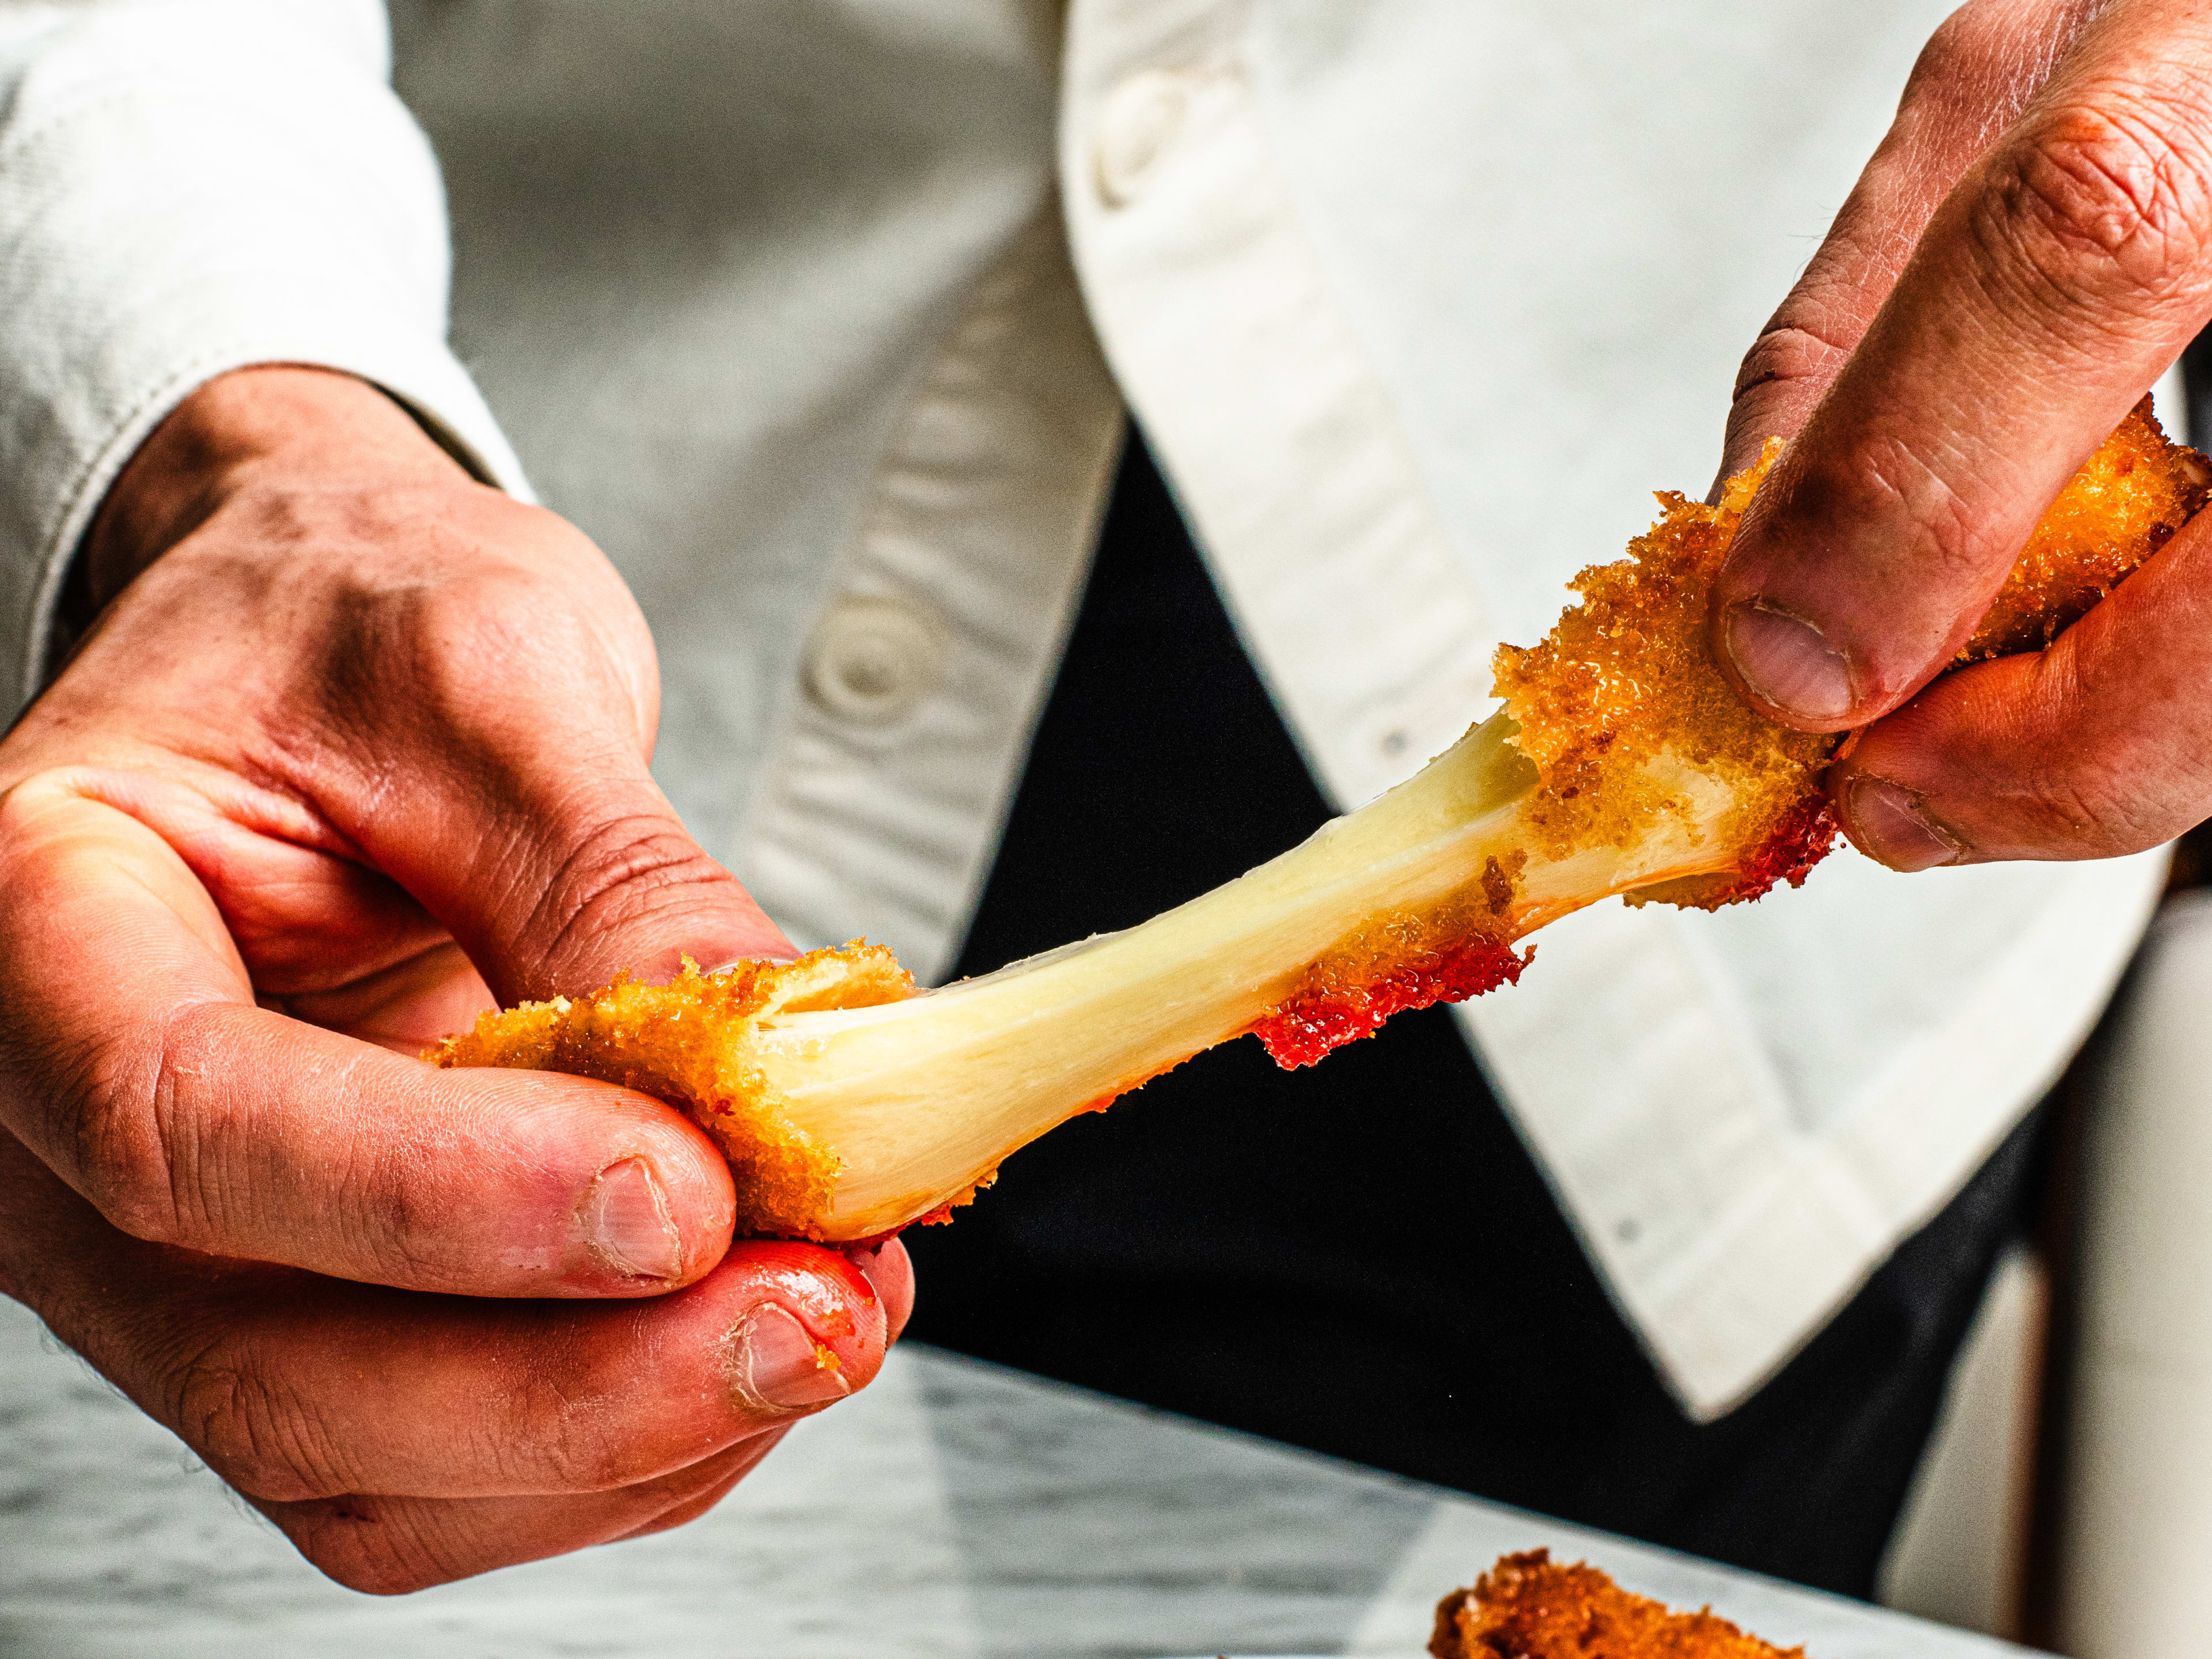 A cheese pull from a mozzarella stick.